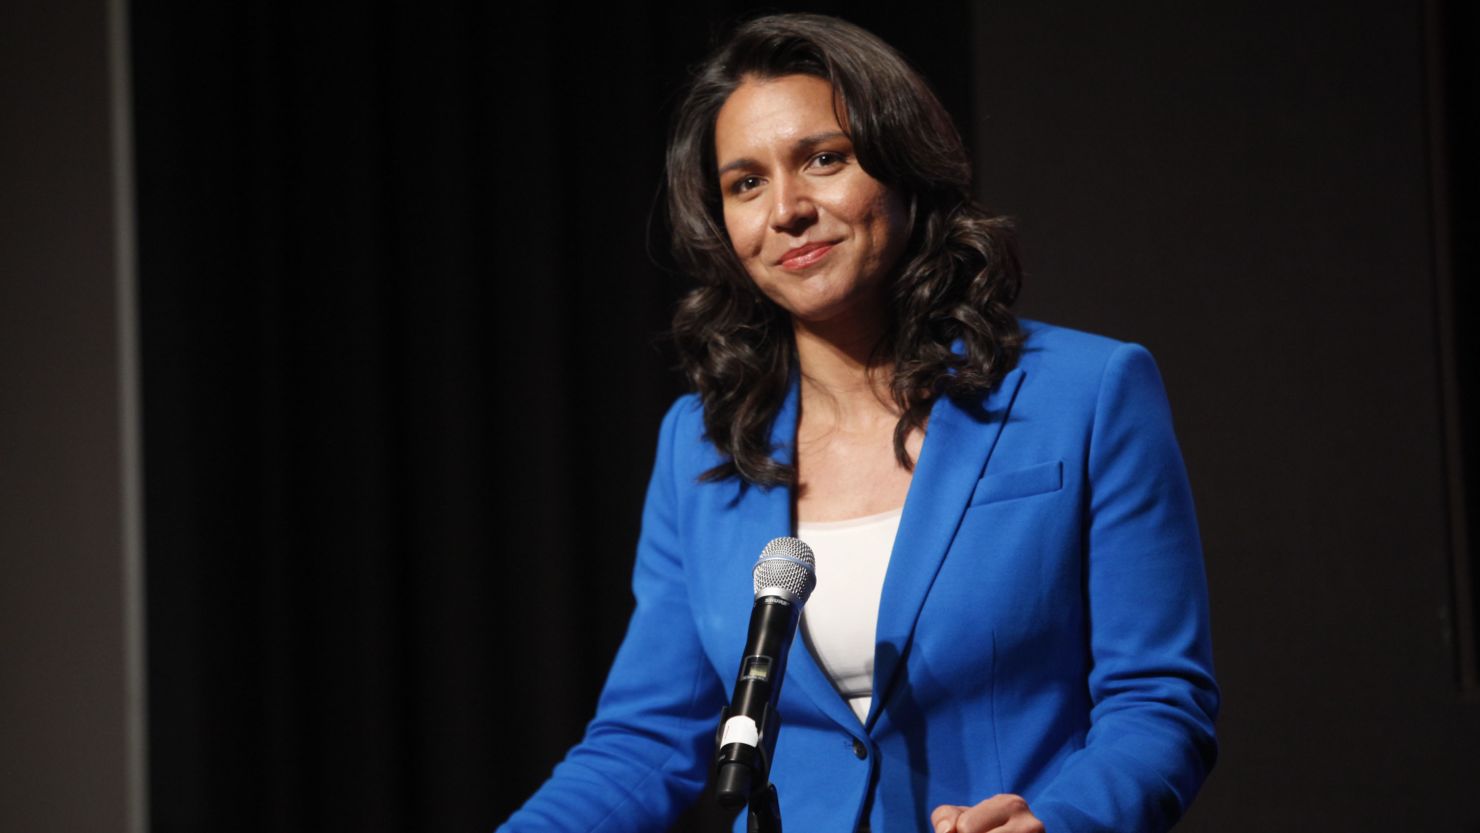 A man is being held in San Diego for threatening to decapitate Rep. Tulsi Gabbard of Hawai.